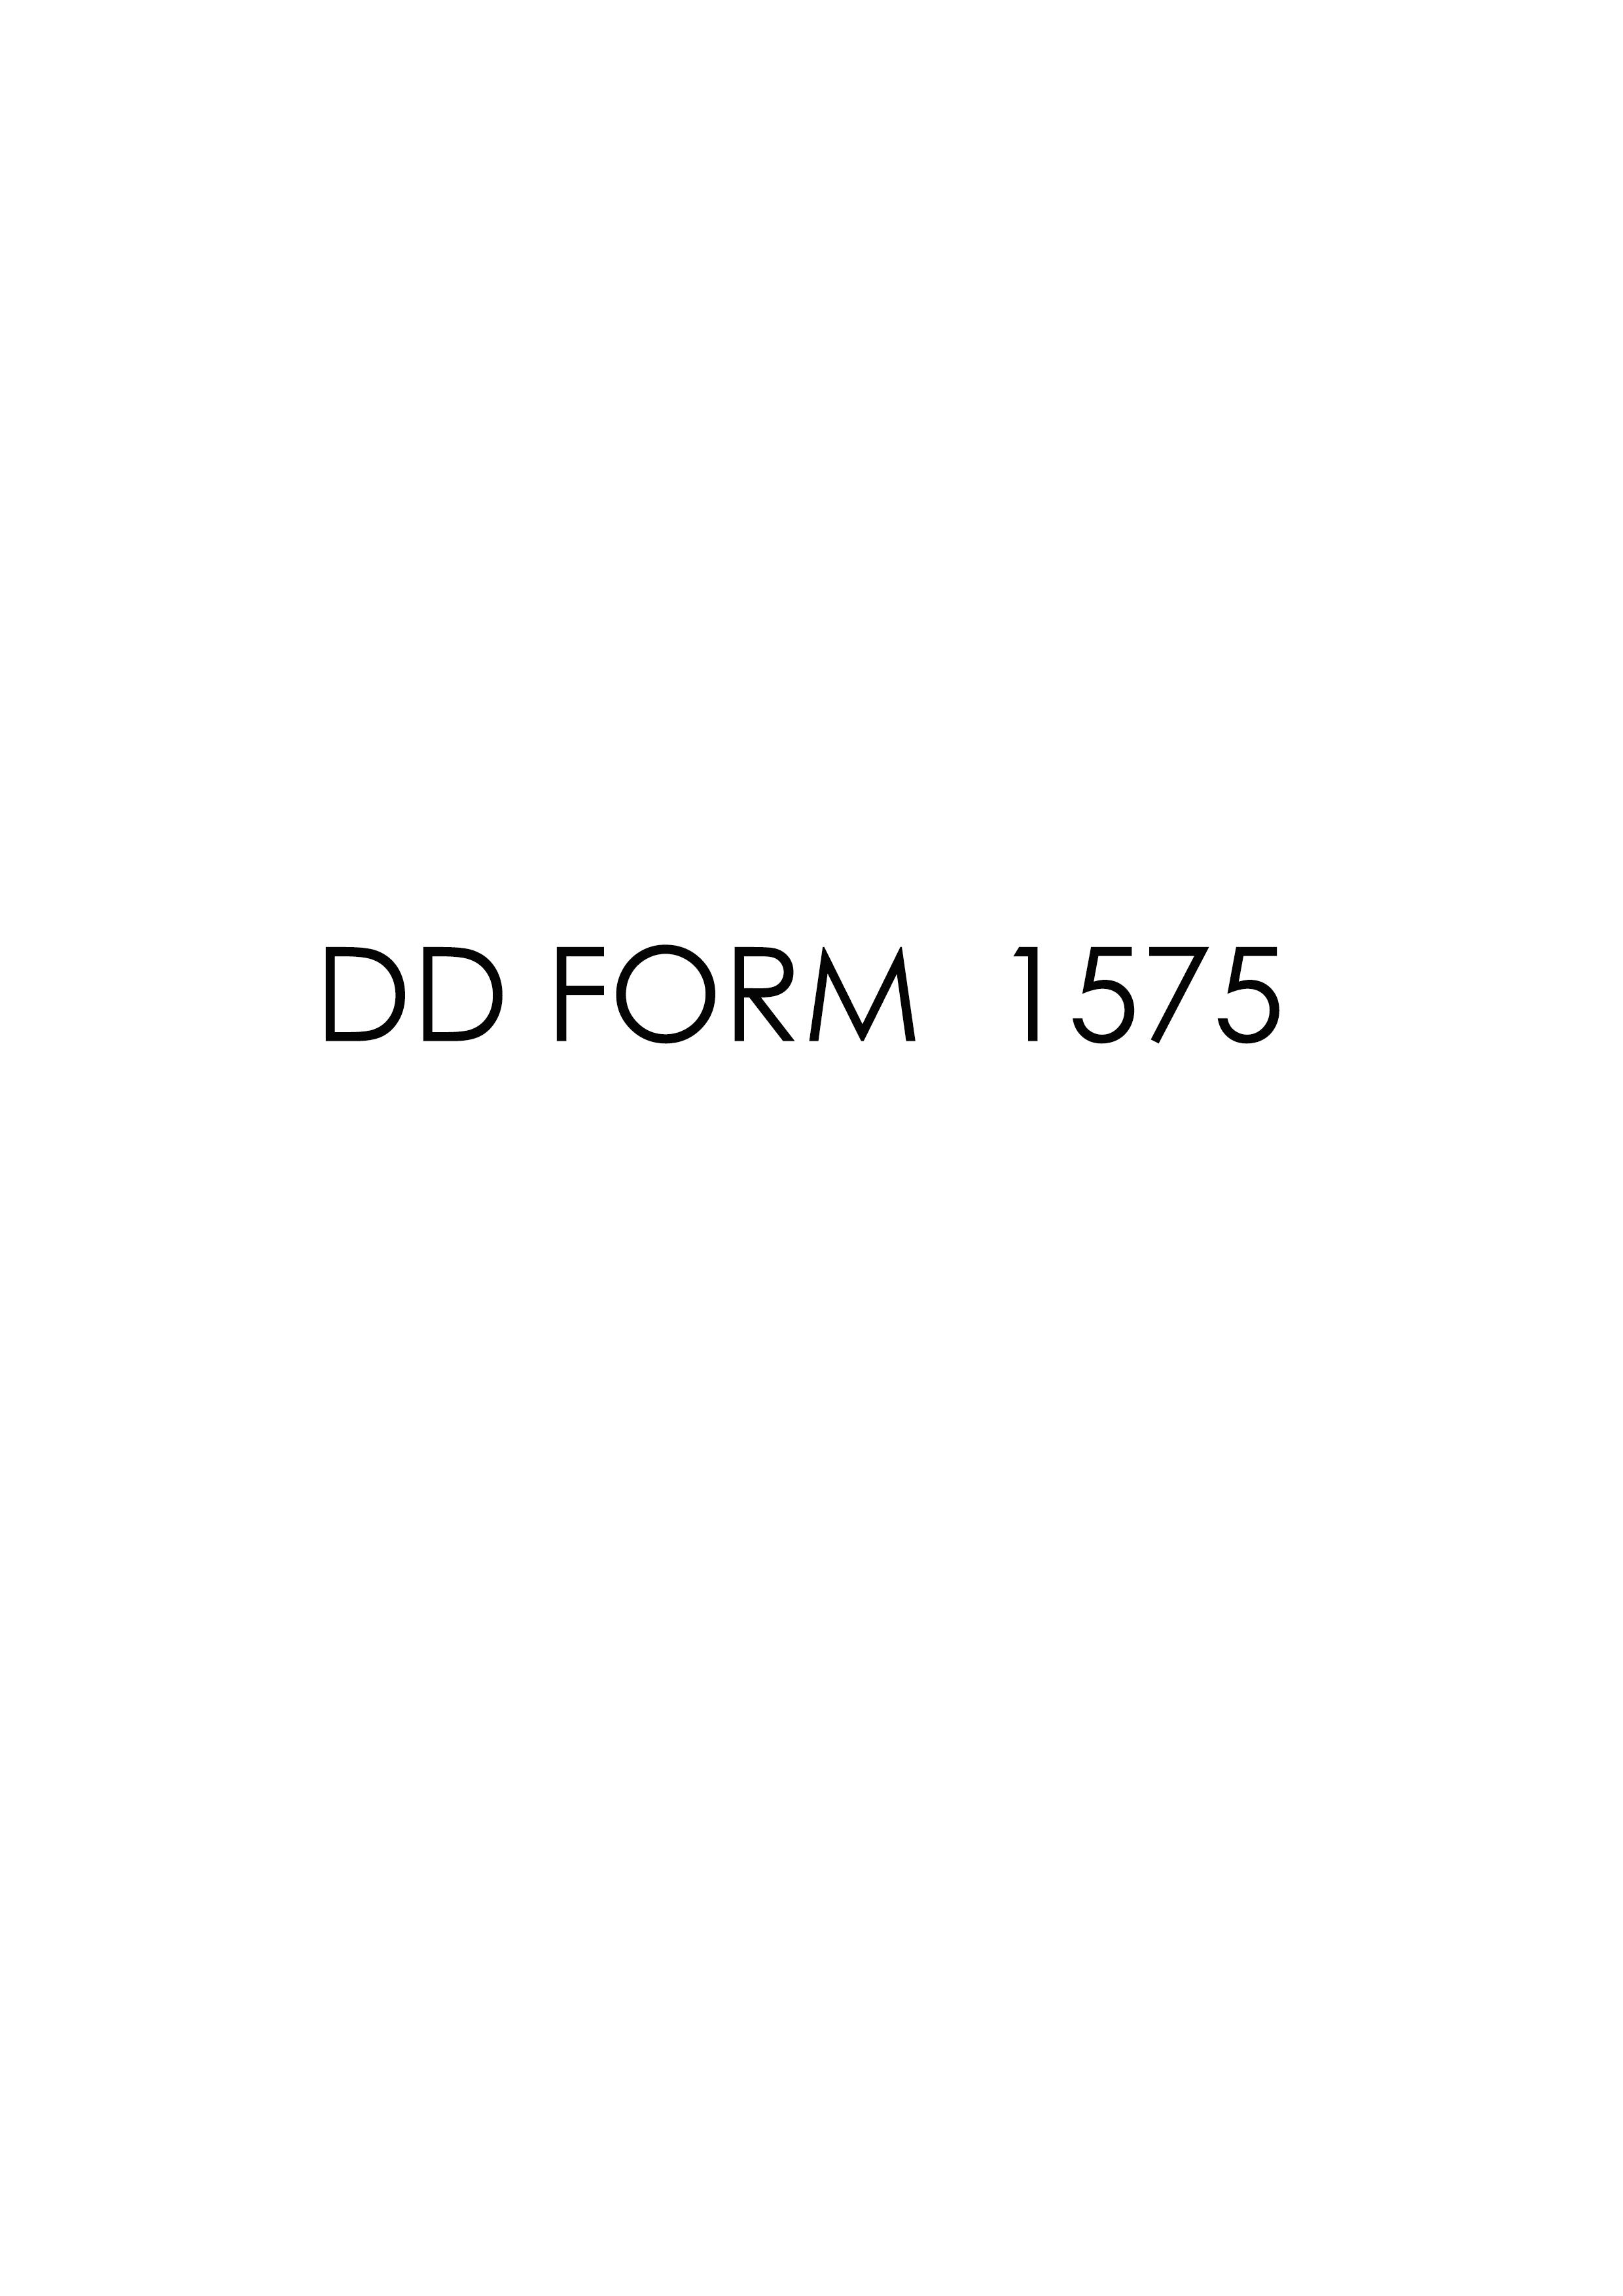 Download Fillable dd Form 1575